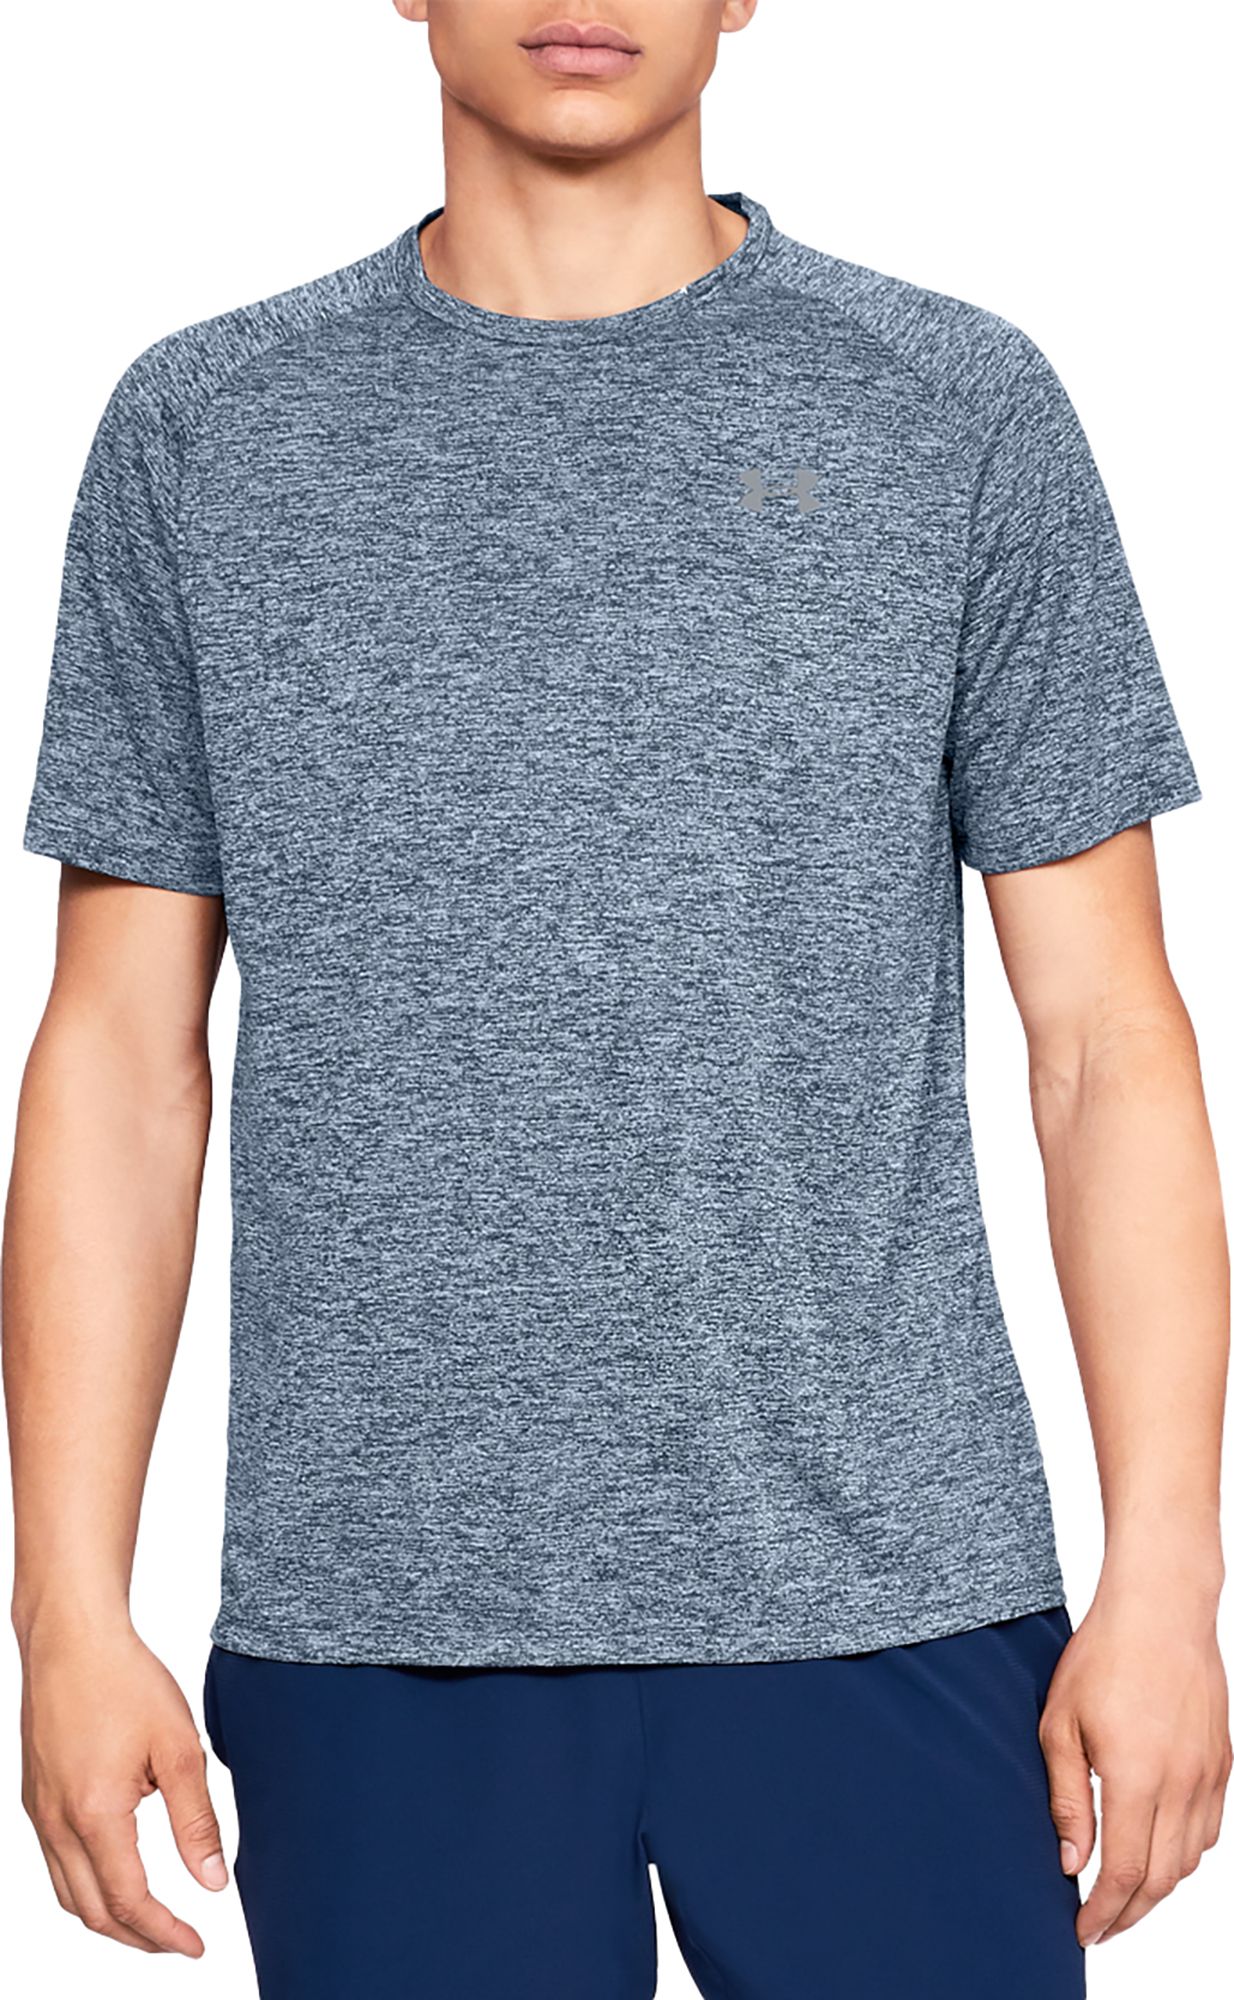 Men's Shirts | Curbside Pickup Available at DICK'S